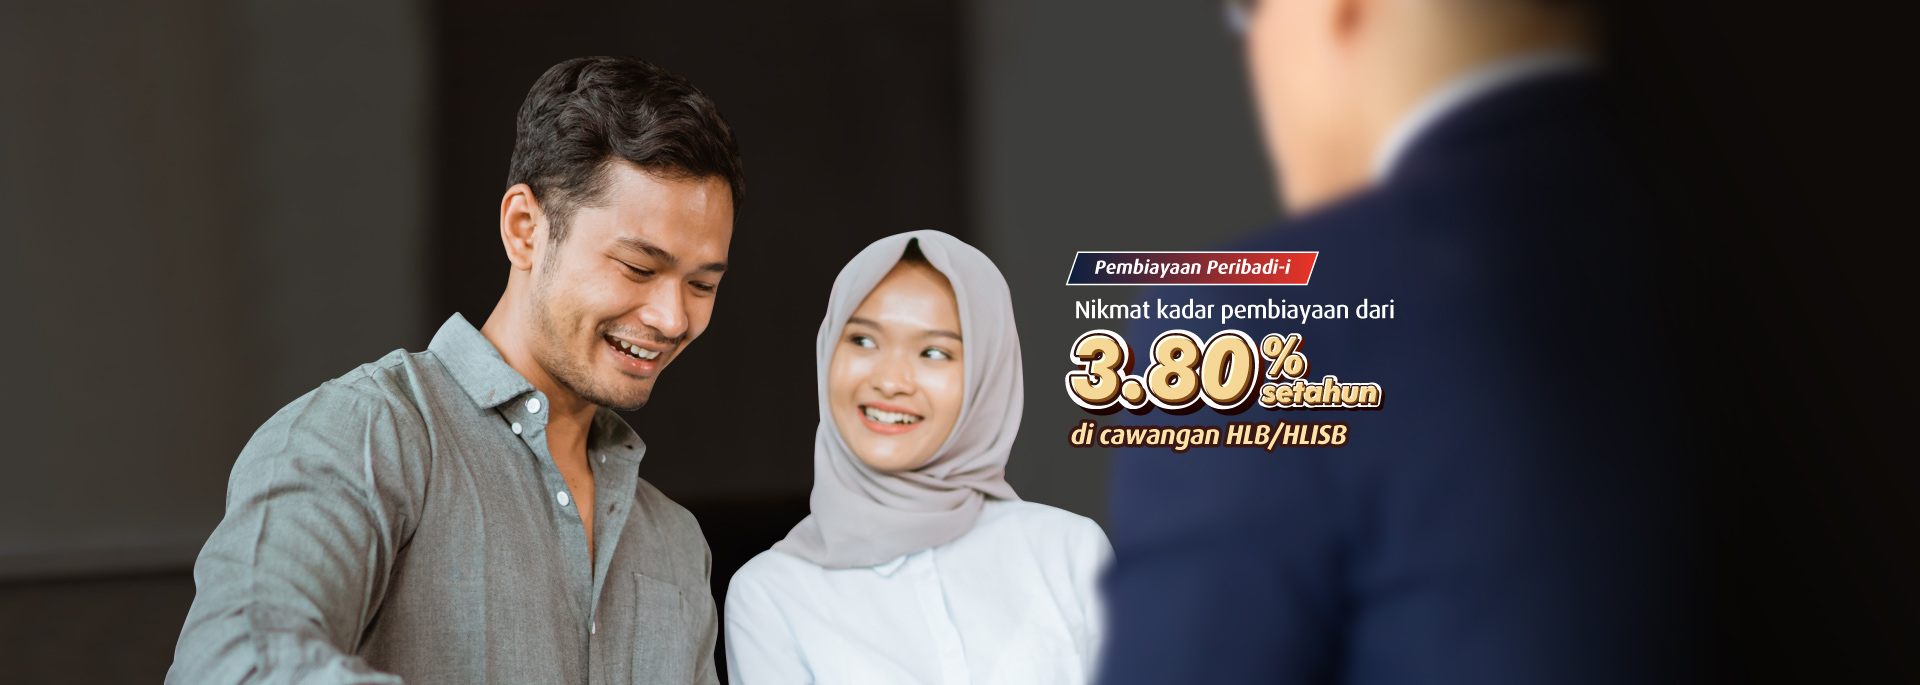 Apply at HLB/HLISB Branches for affordable financing rates from 3.80% p.a.*